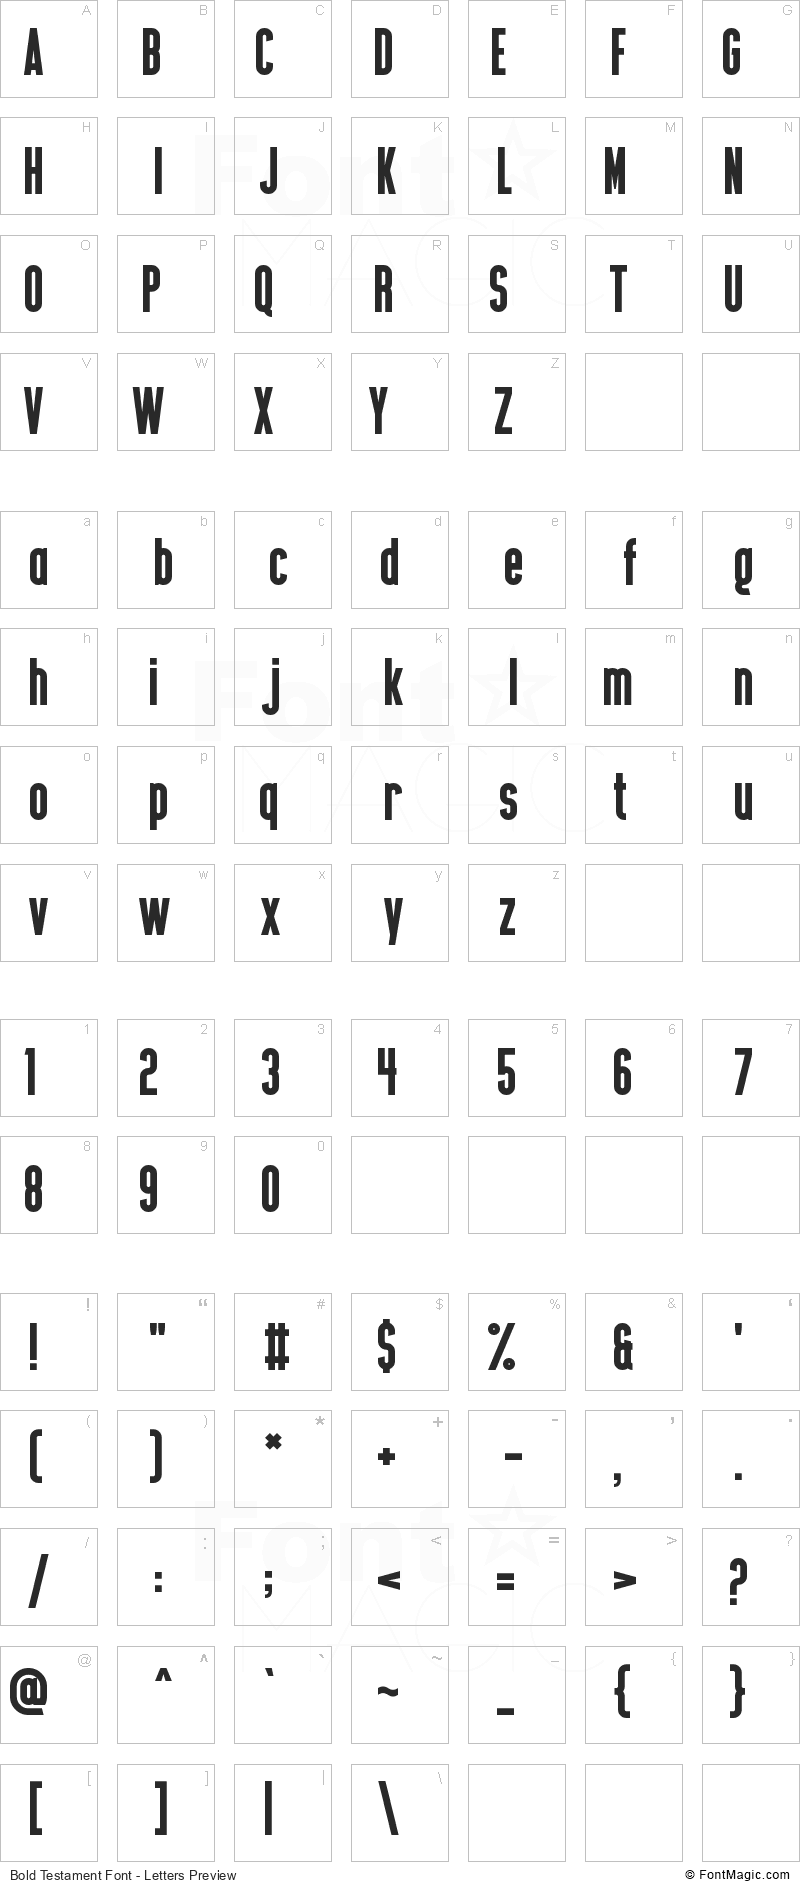 Bold Testament Font - All Latters Preview Chart